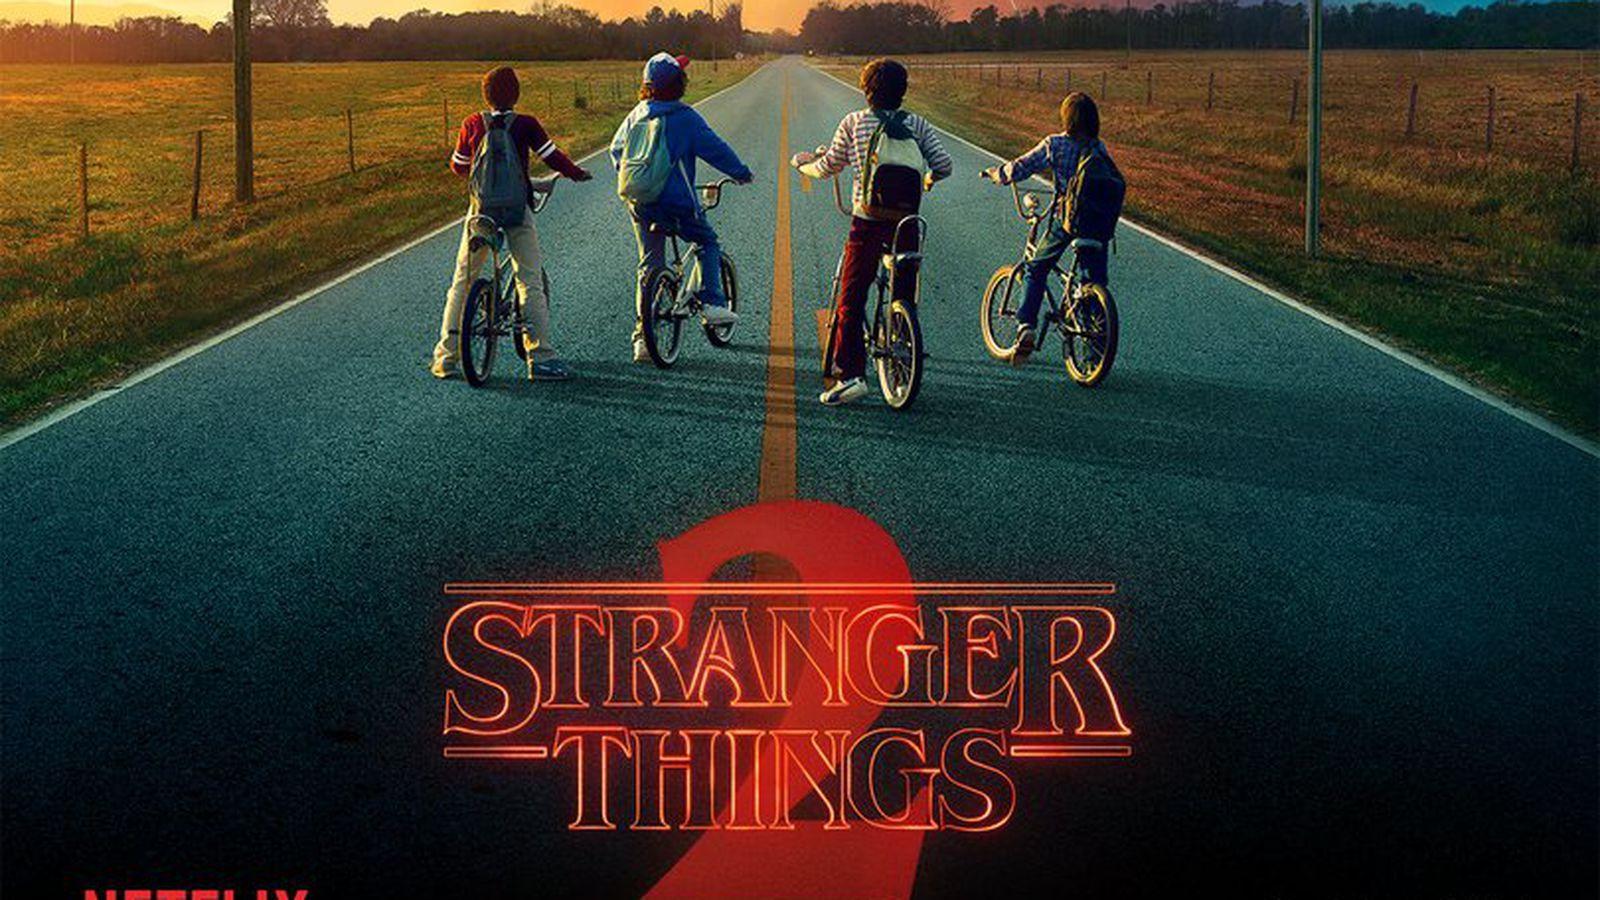 The Stranger Things 2 poster hints at more ways the show will borrow from Stephen King